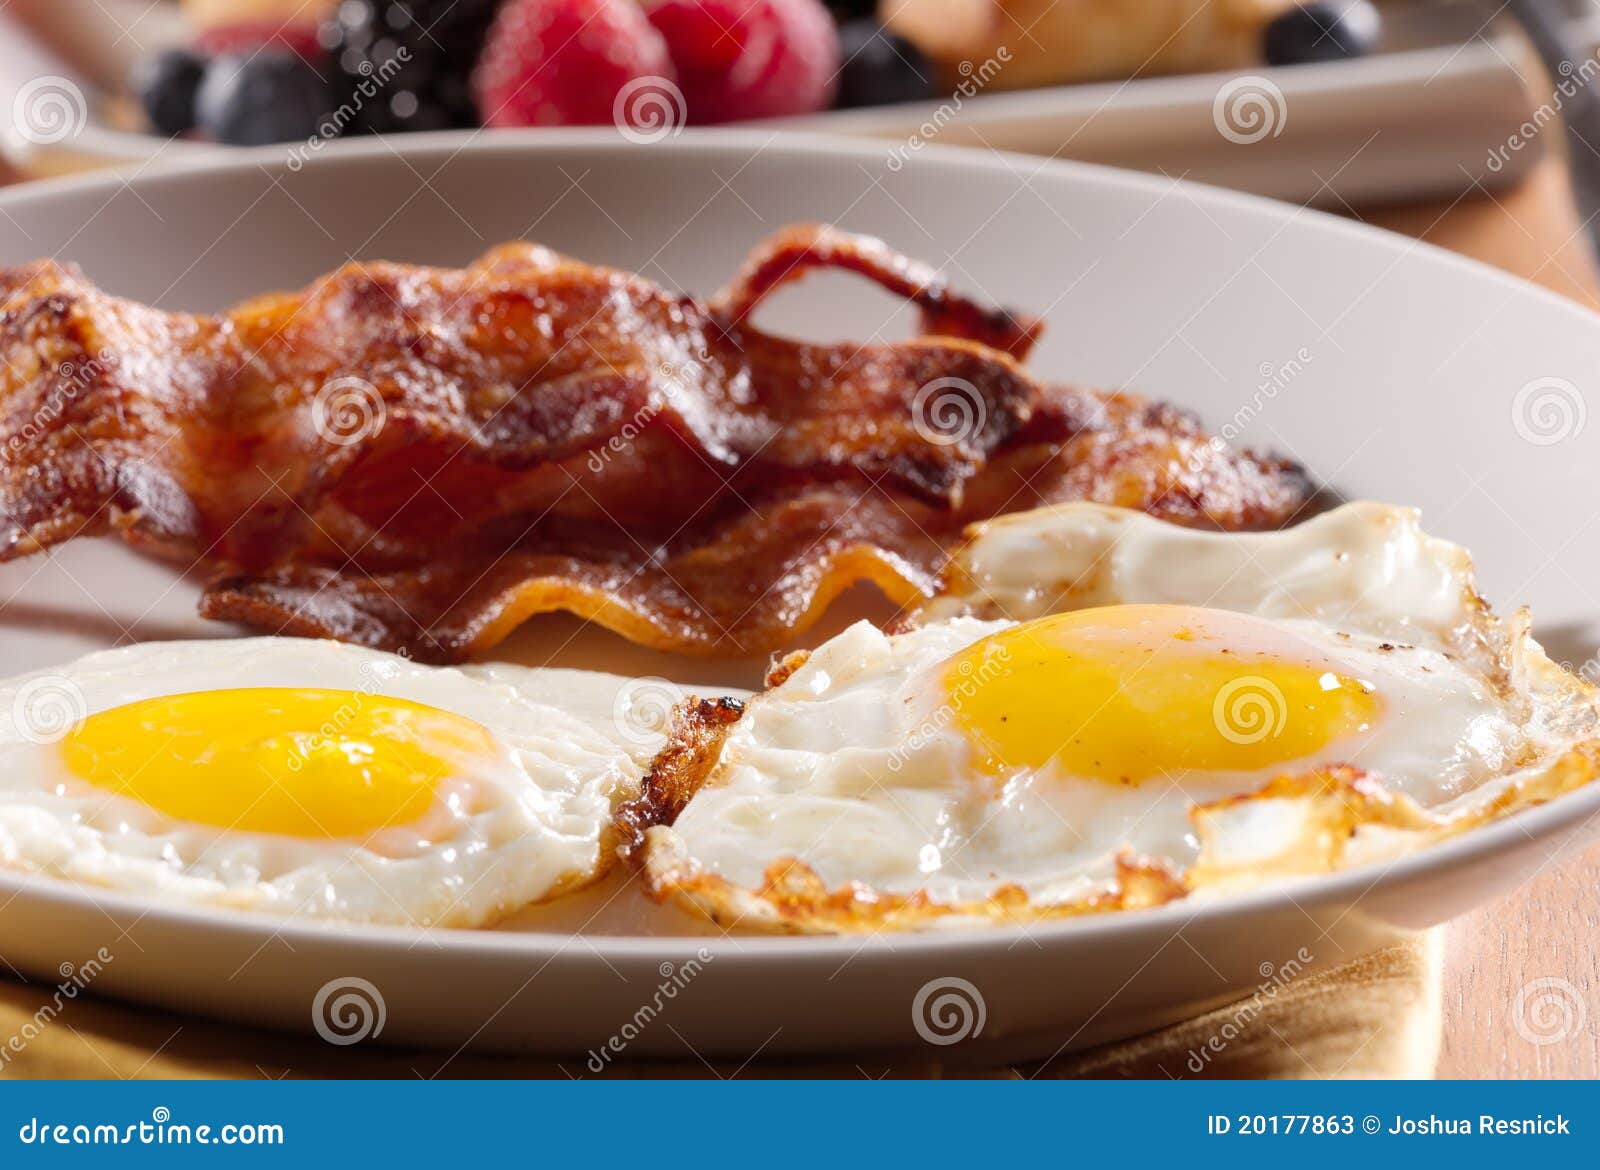 sunny side up eggs with fried bacon.